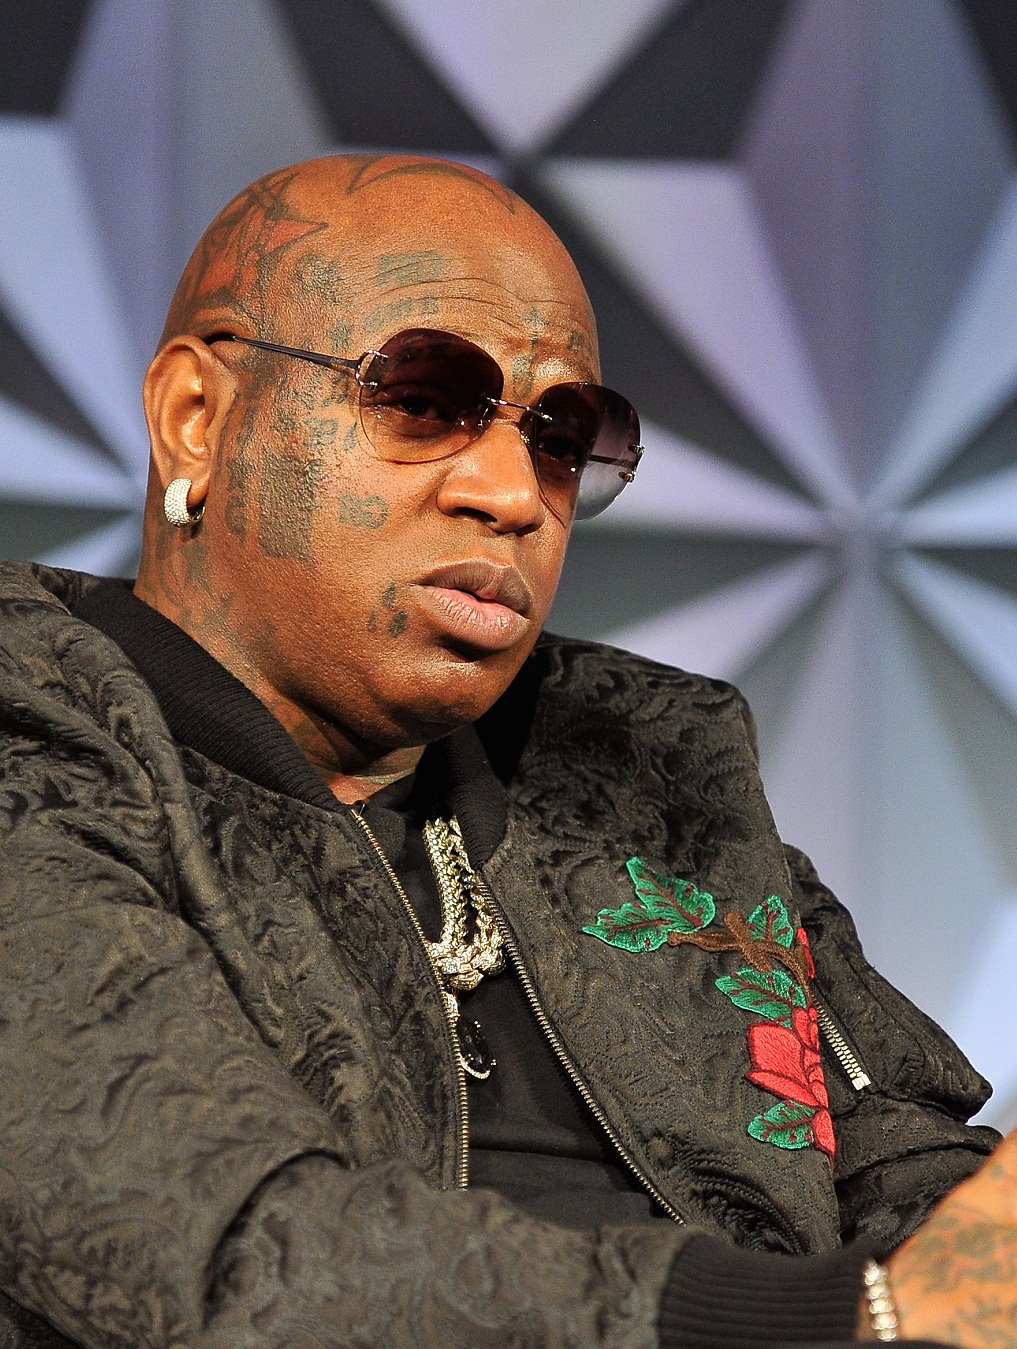 Birdman  At a  Image 2 from Tattoos of the Week Face Tattoos  BET